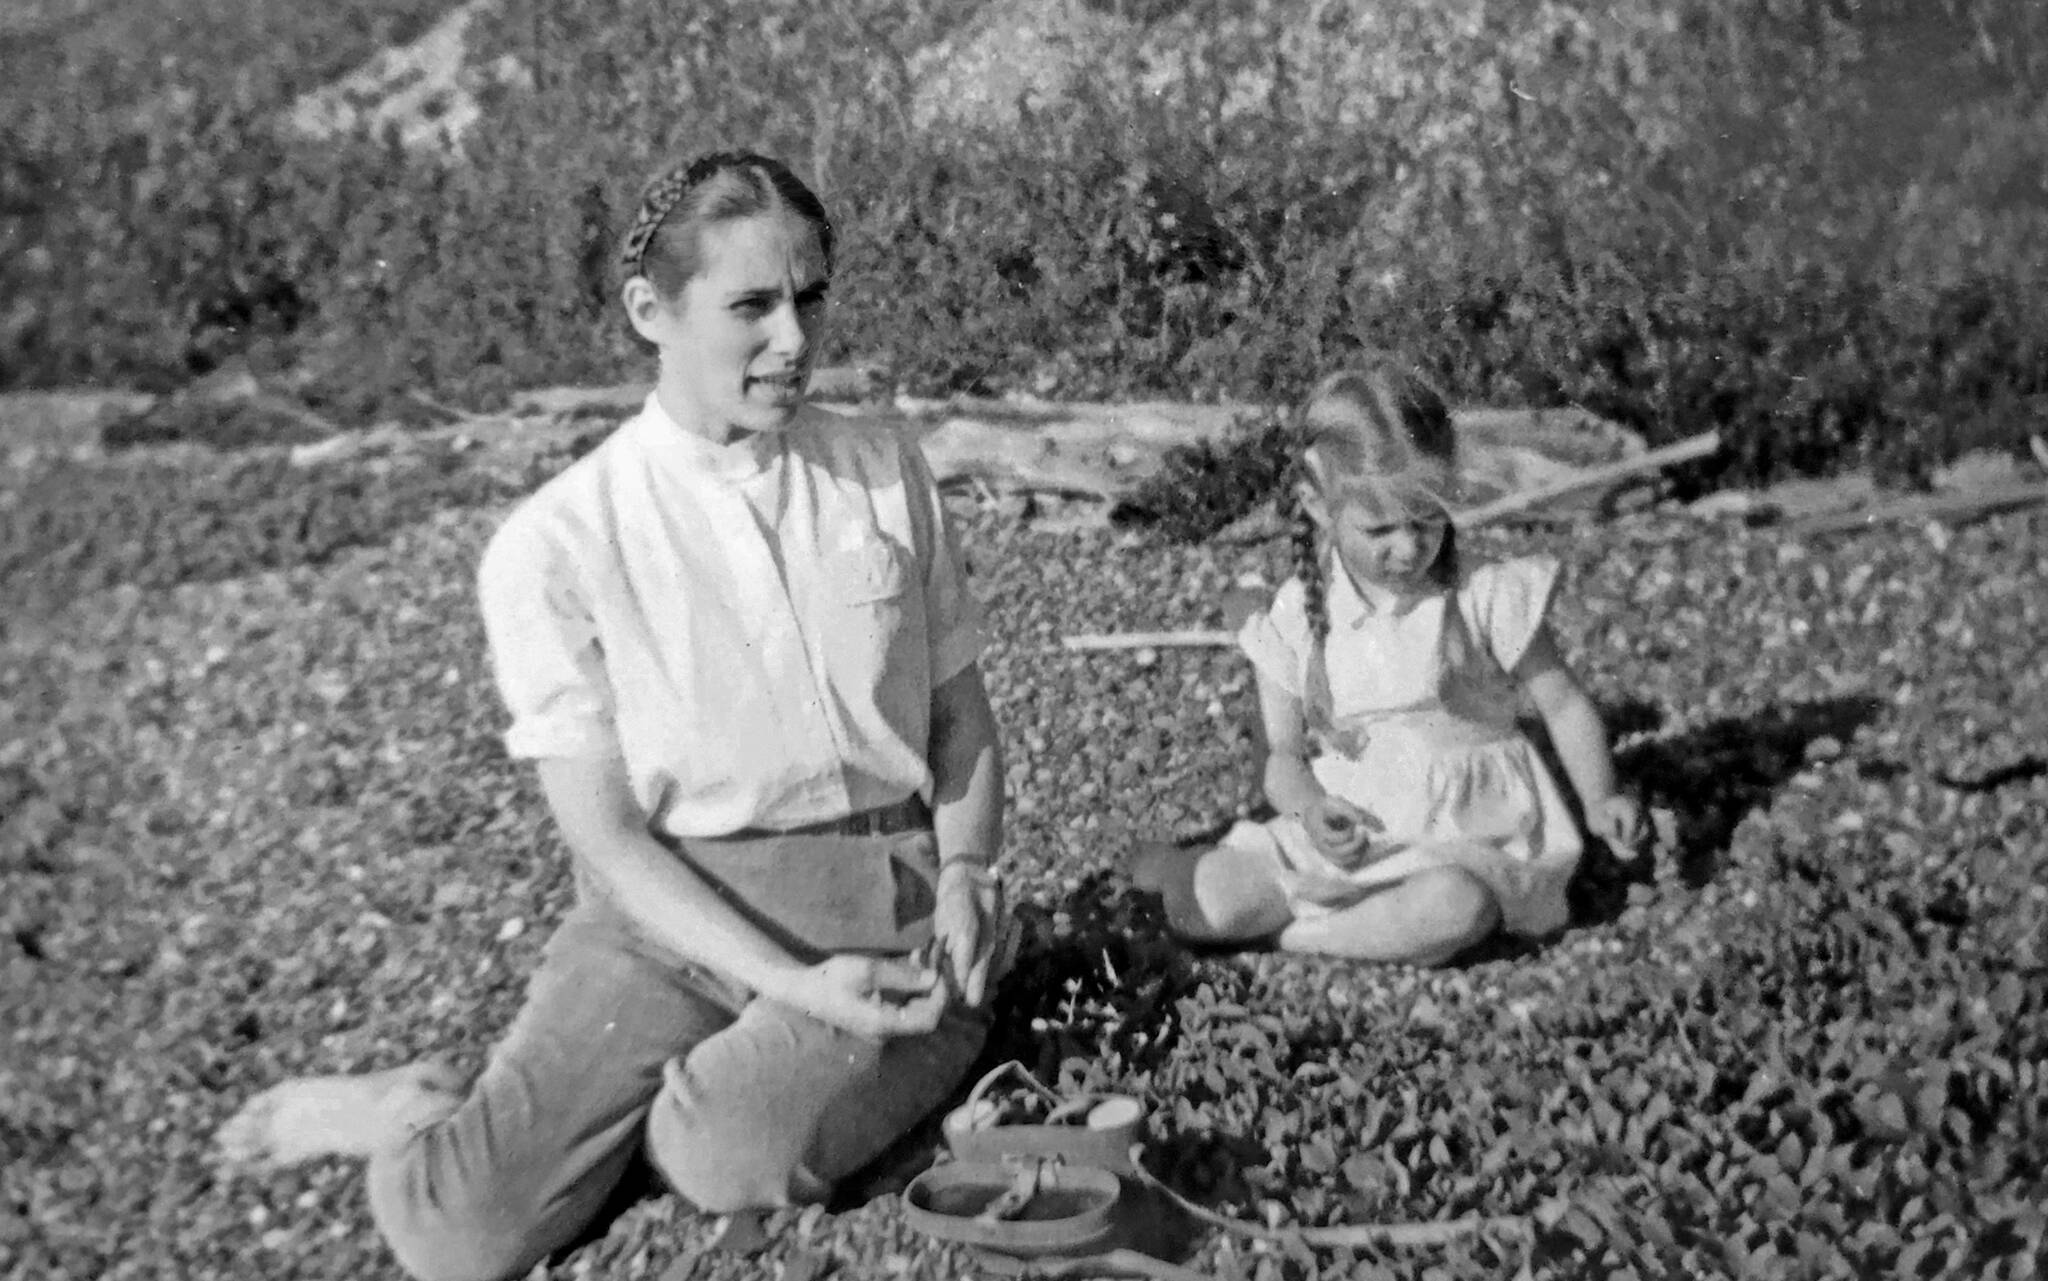 Marian and Grace Goble during a Kenai-area picnic in 1958. (Photo courtesy of Ben and Marian Goble)